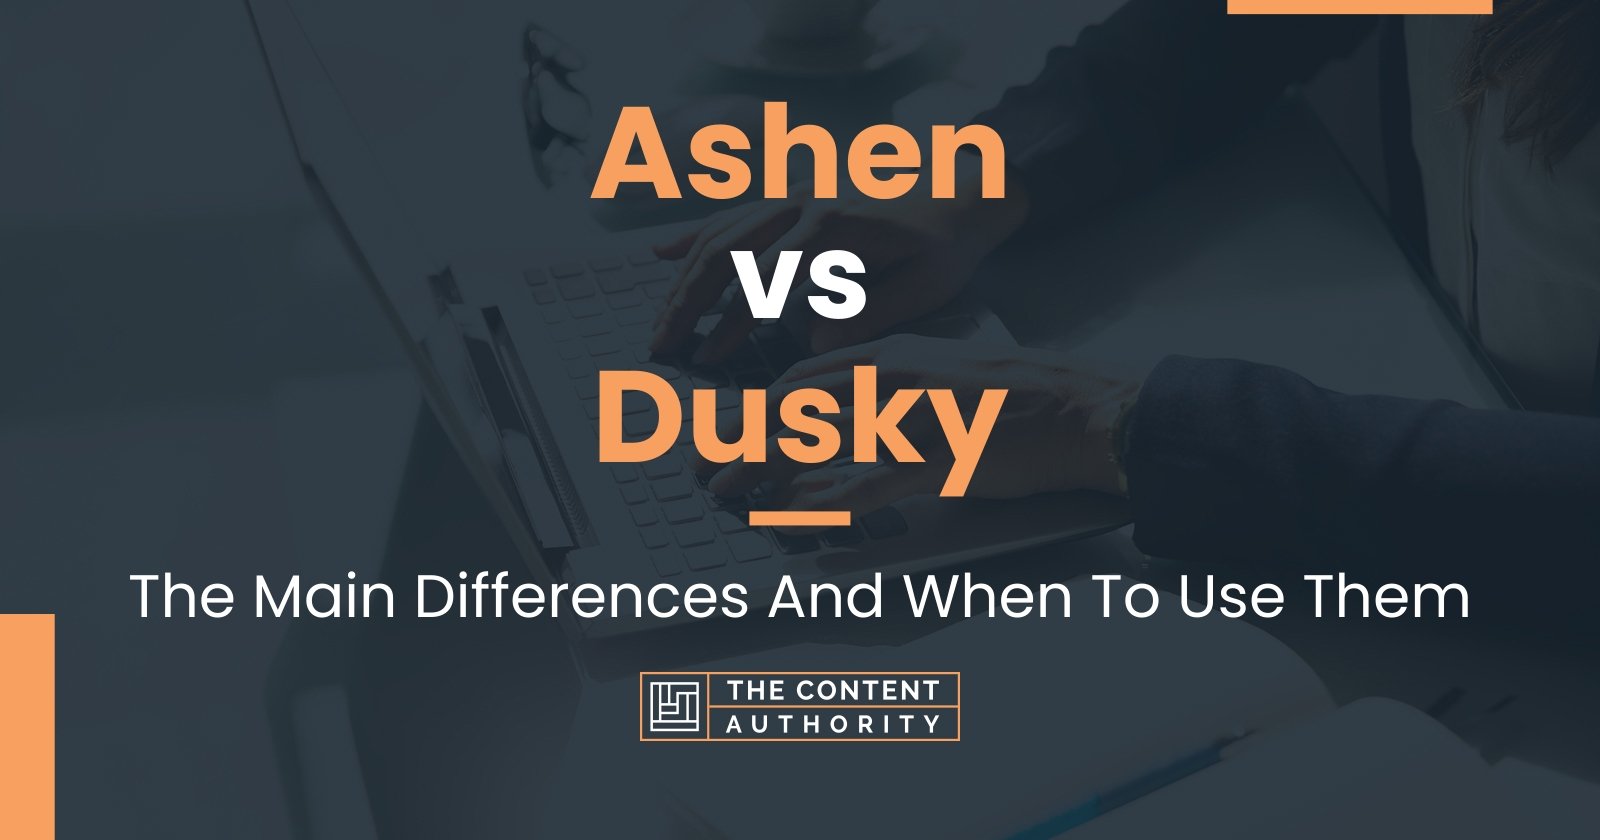 Ashen vs Dusky: The Main Differences And When To Use Them